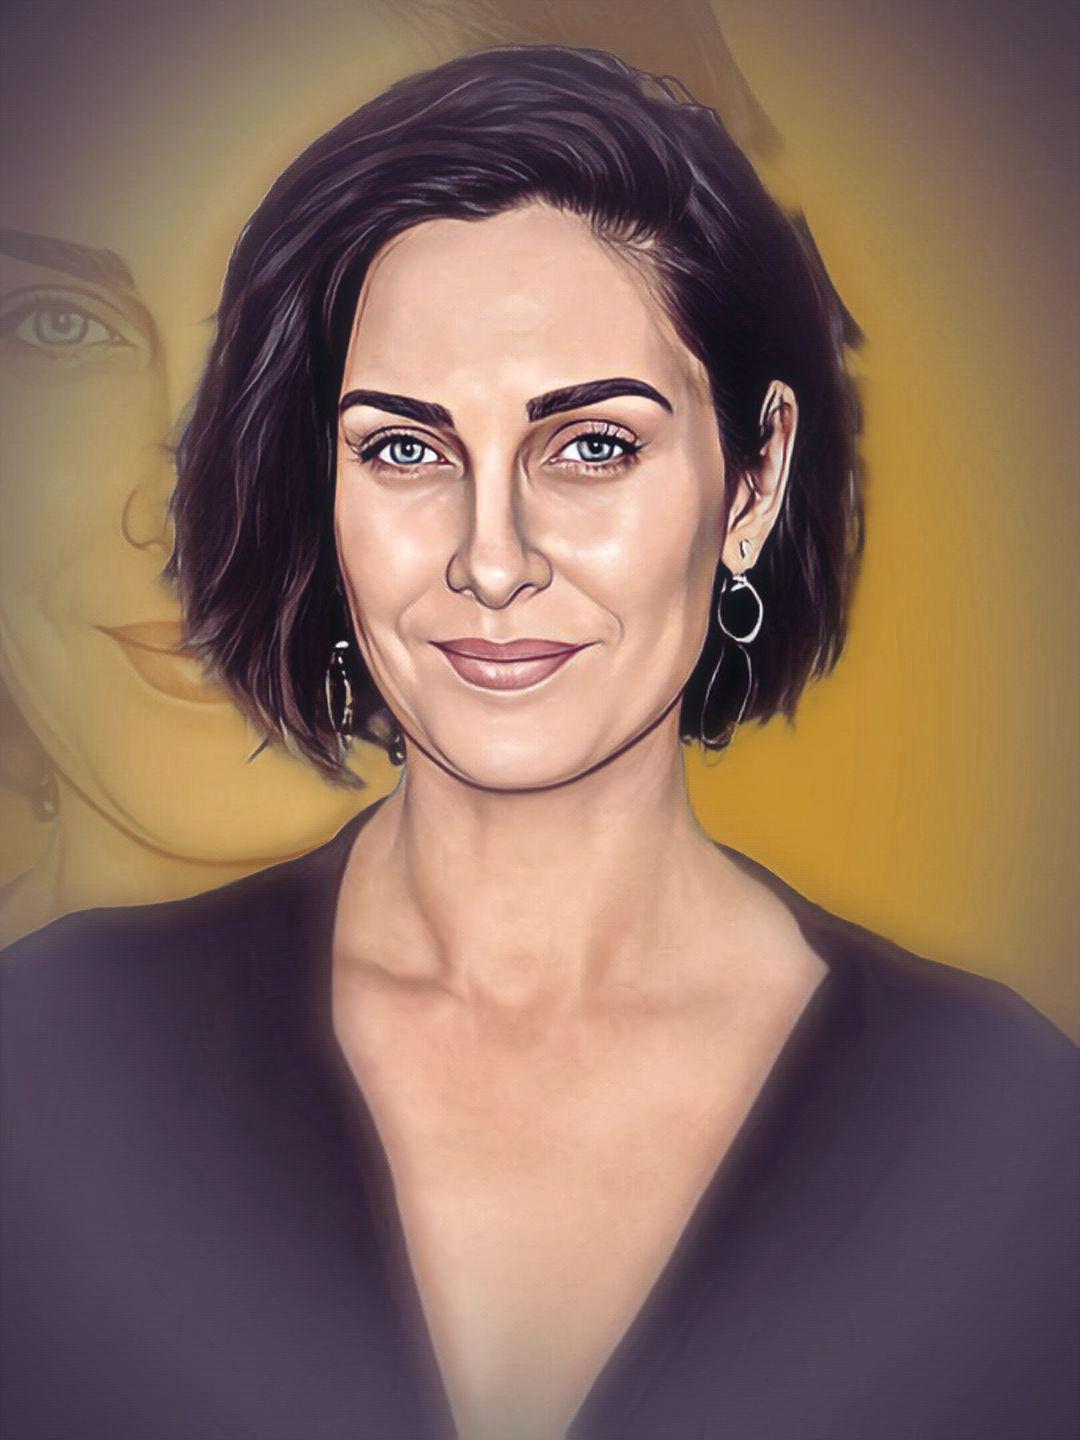 Amateur Wet Pussy Webcam - Carrie-Anne Moss - Celeb ART - Beautiful Artworks of Celebrities,  Footballers, Politicians and Famous People in World | OpenSea